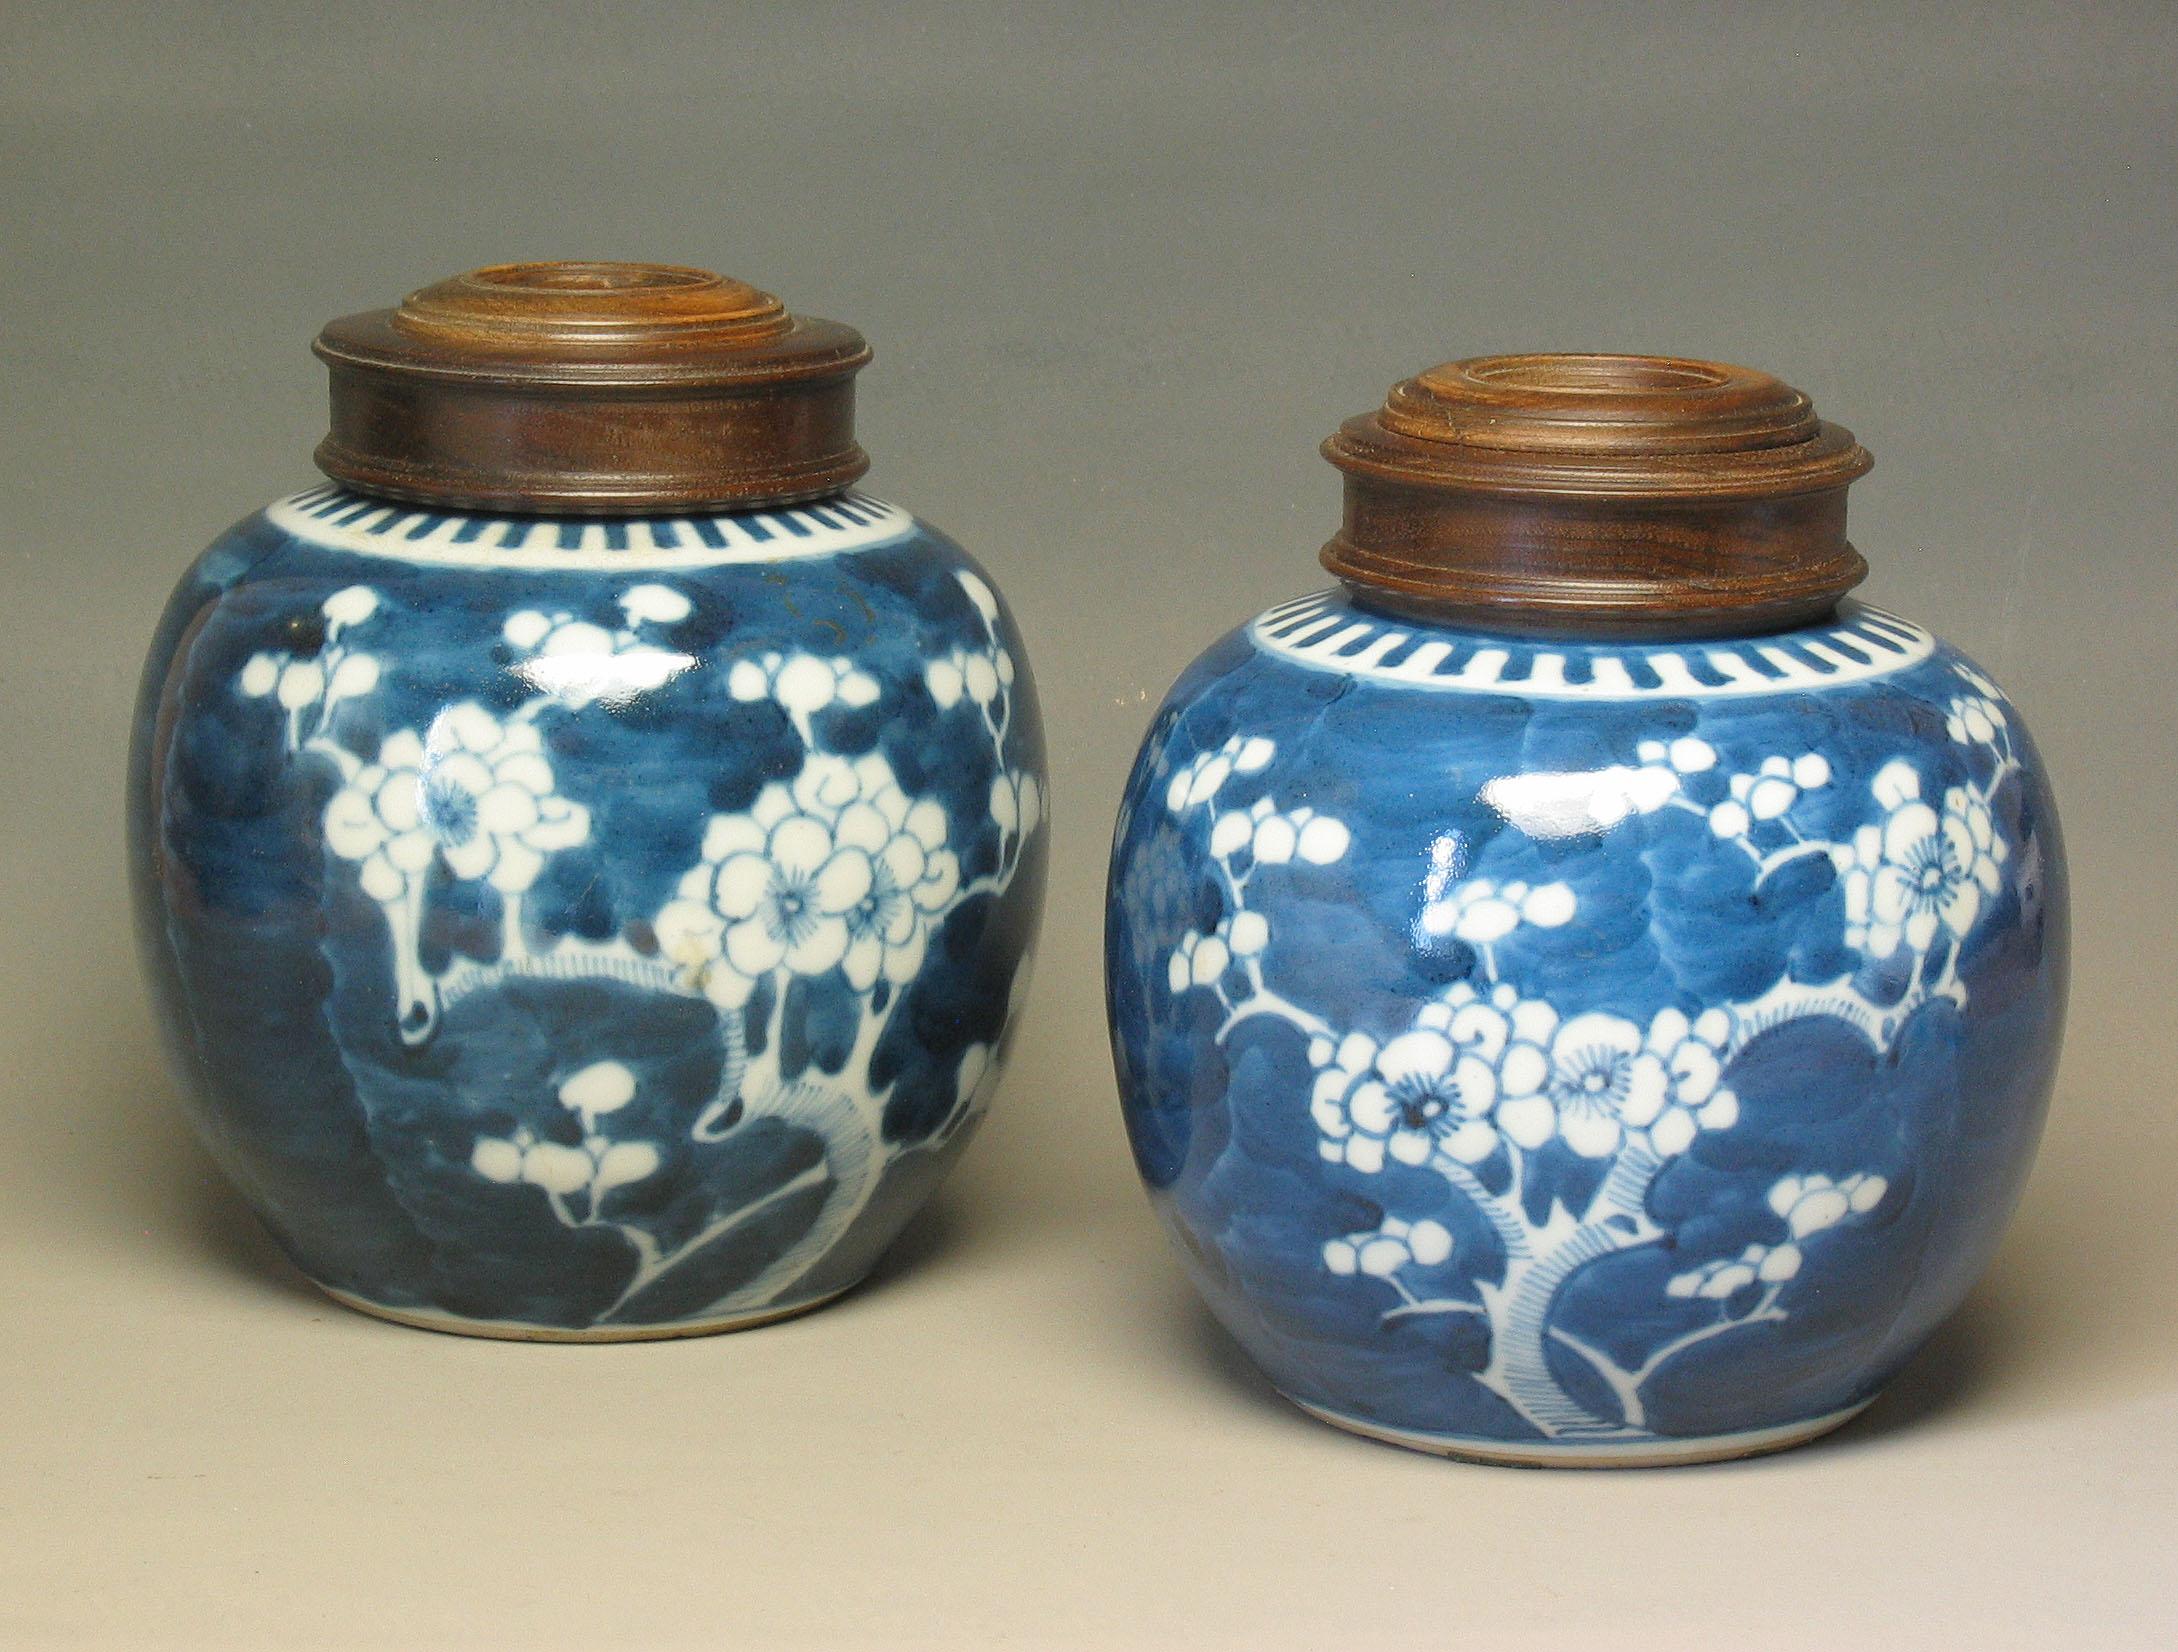 Two Chinese Blue and White Prunus Globular Jars Late Qing Dynasty 1